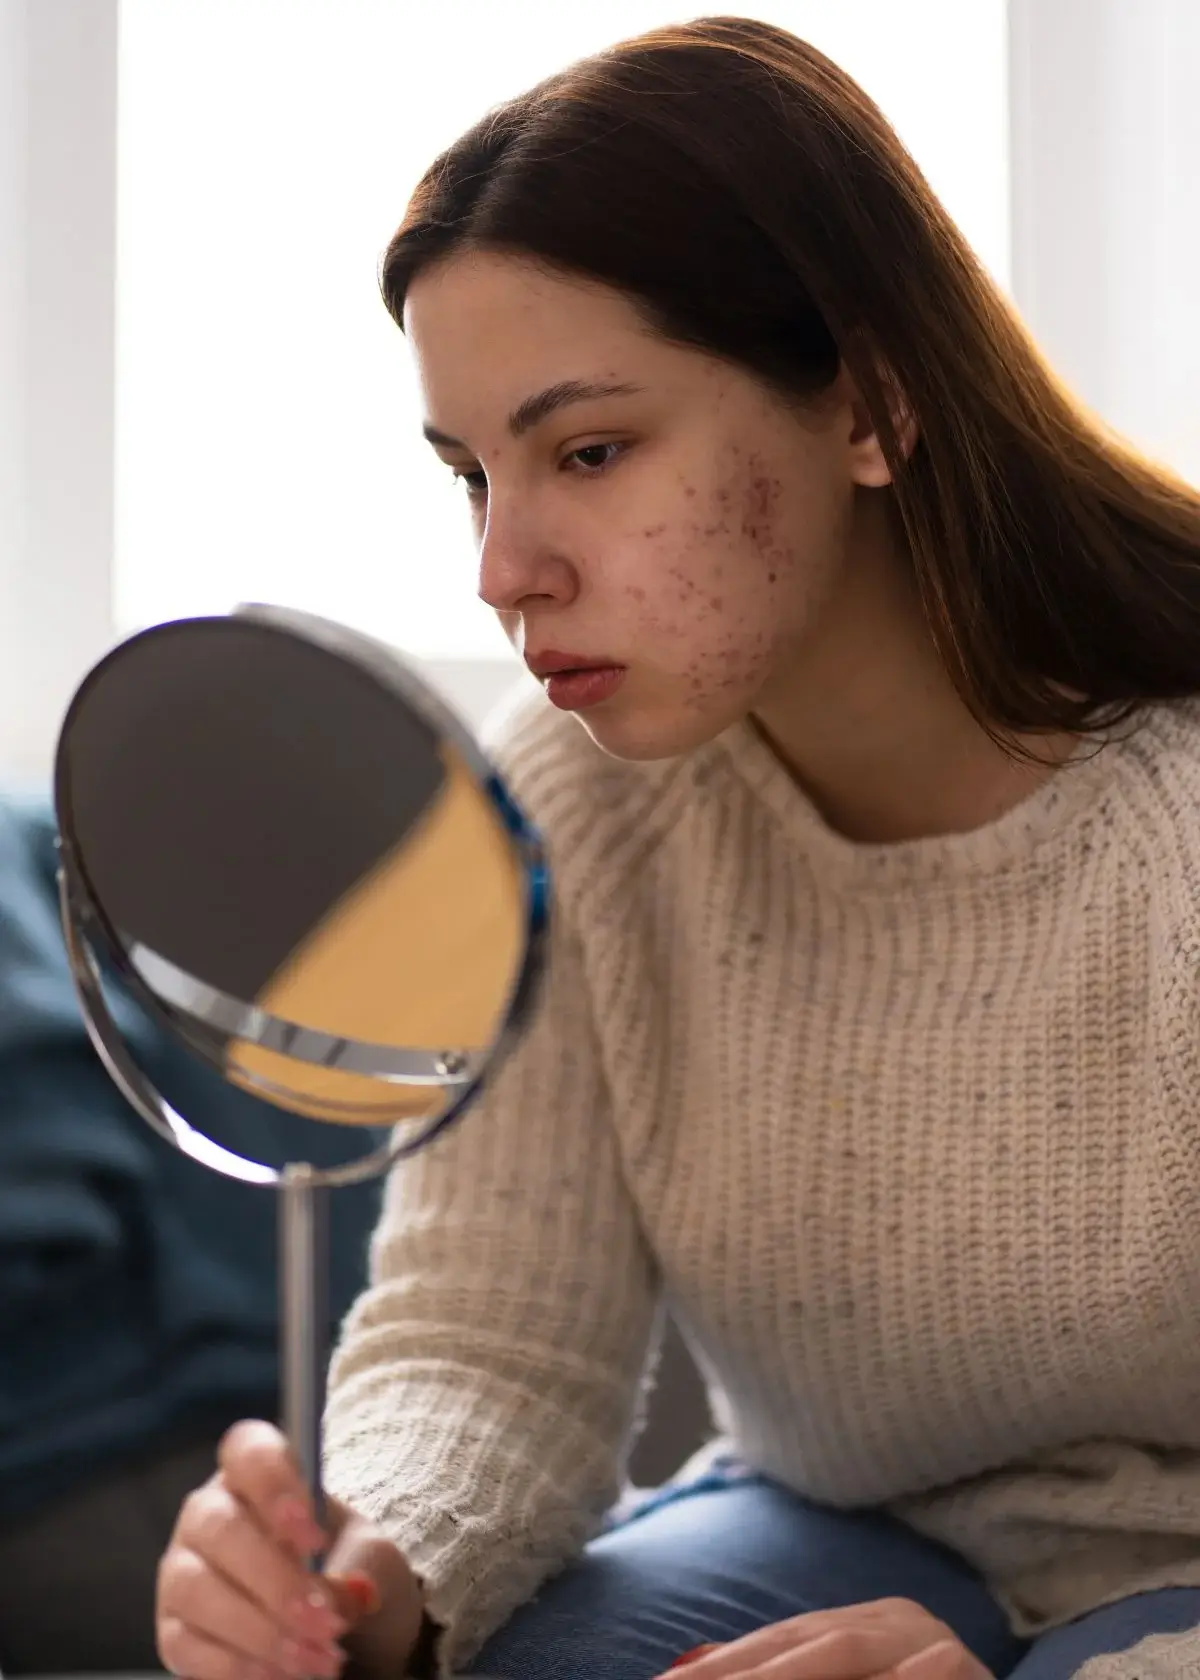 What causes hormonal cystic acne?